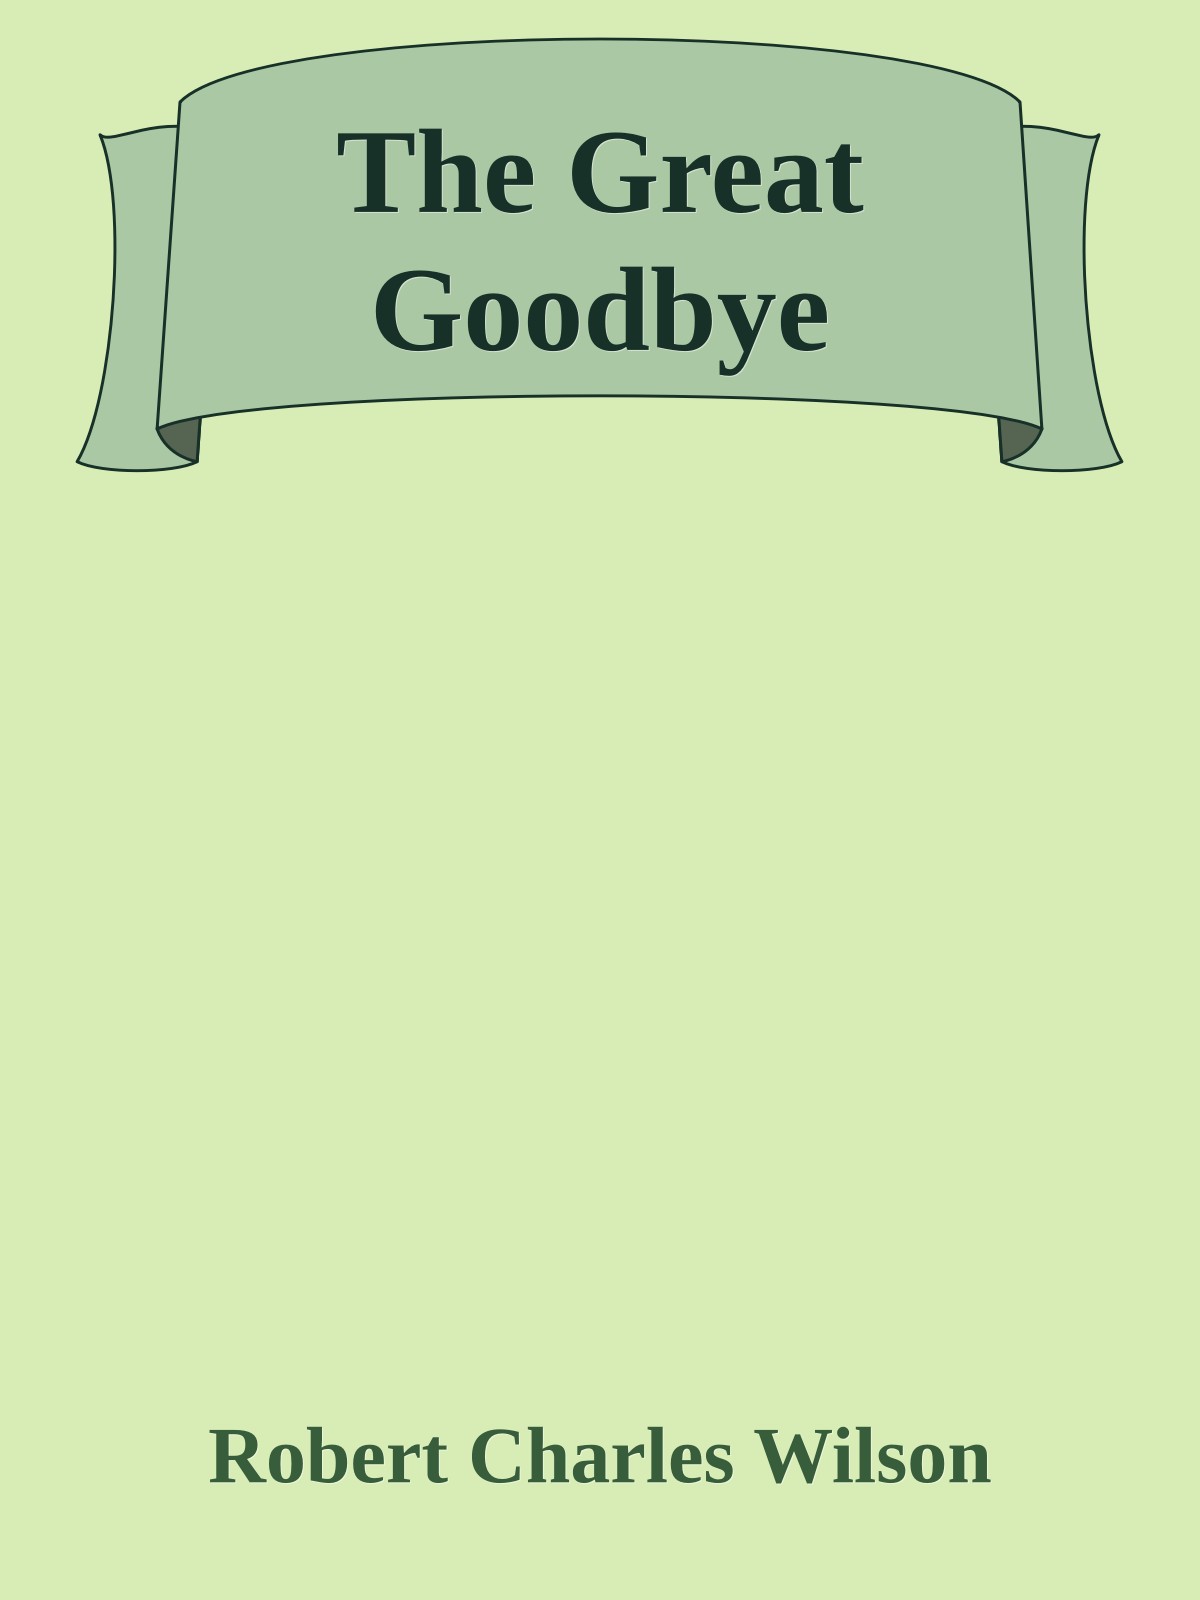 The Great Goodbye